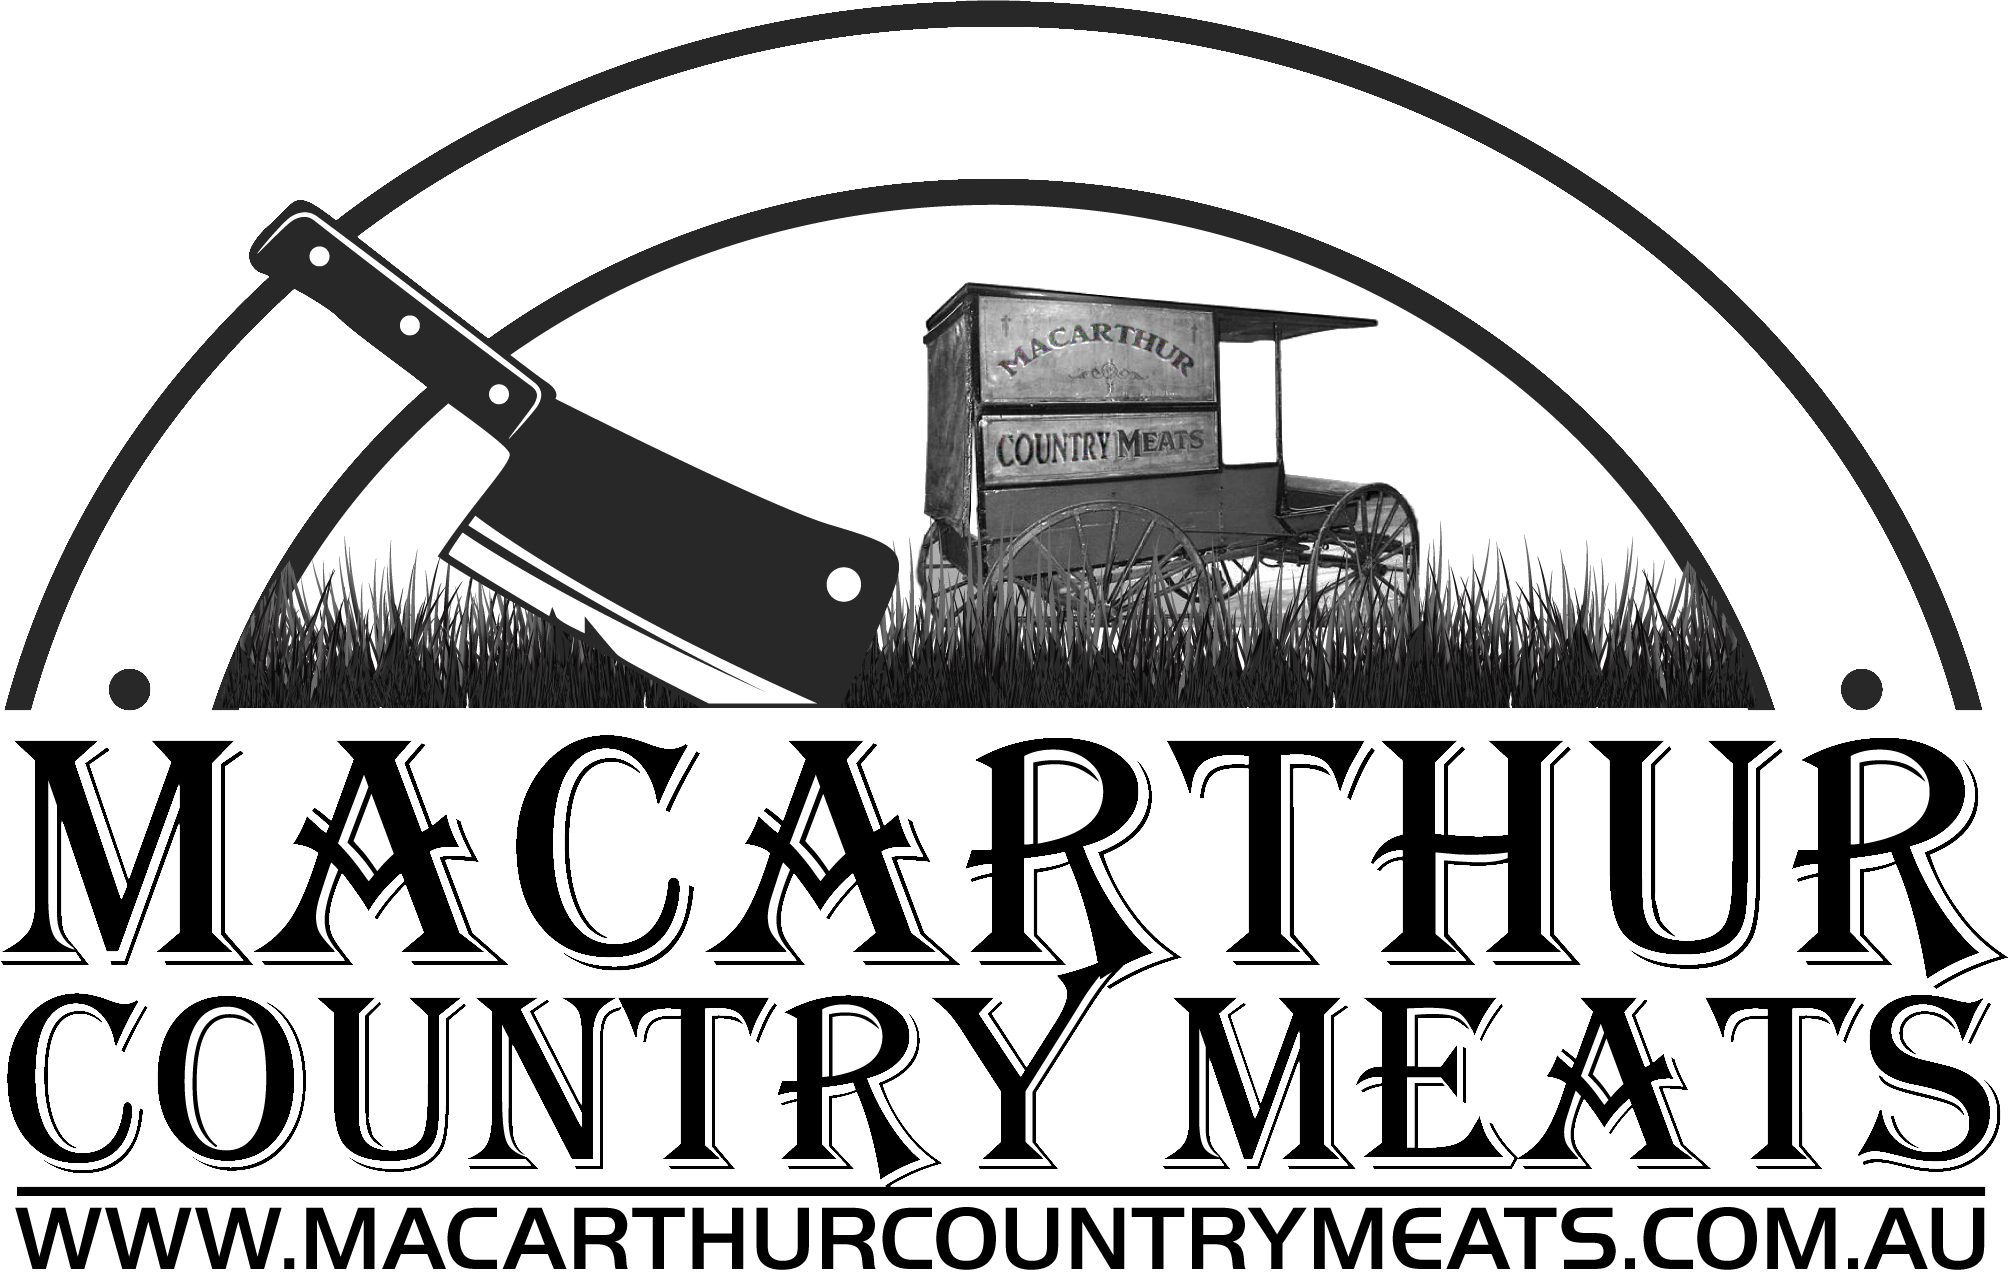 Macarthur Country Meats